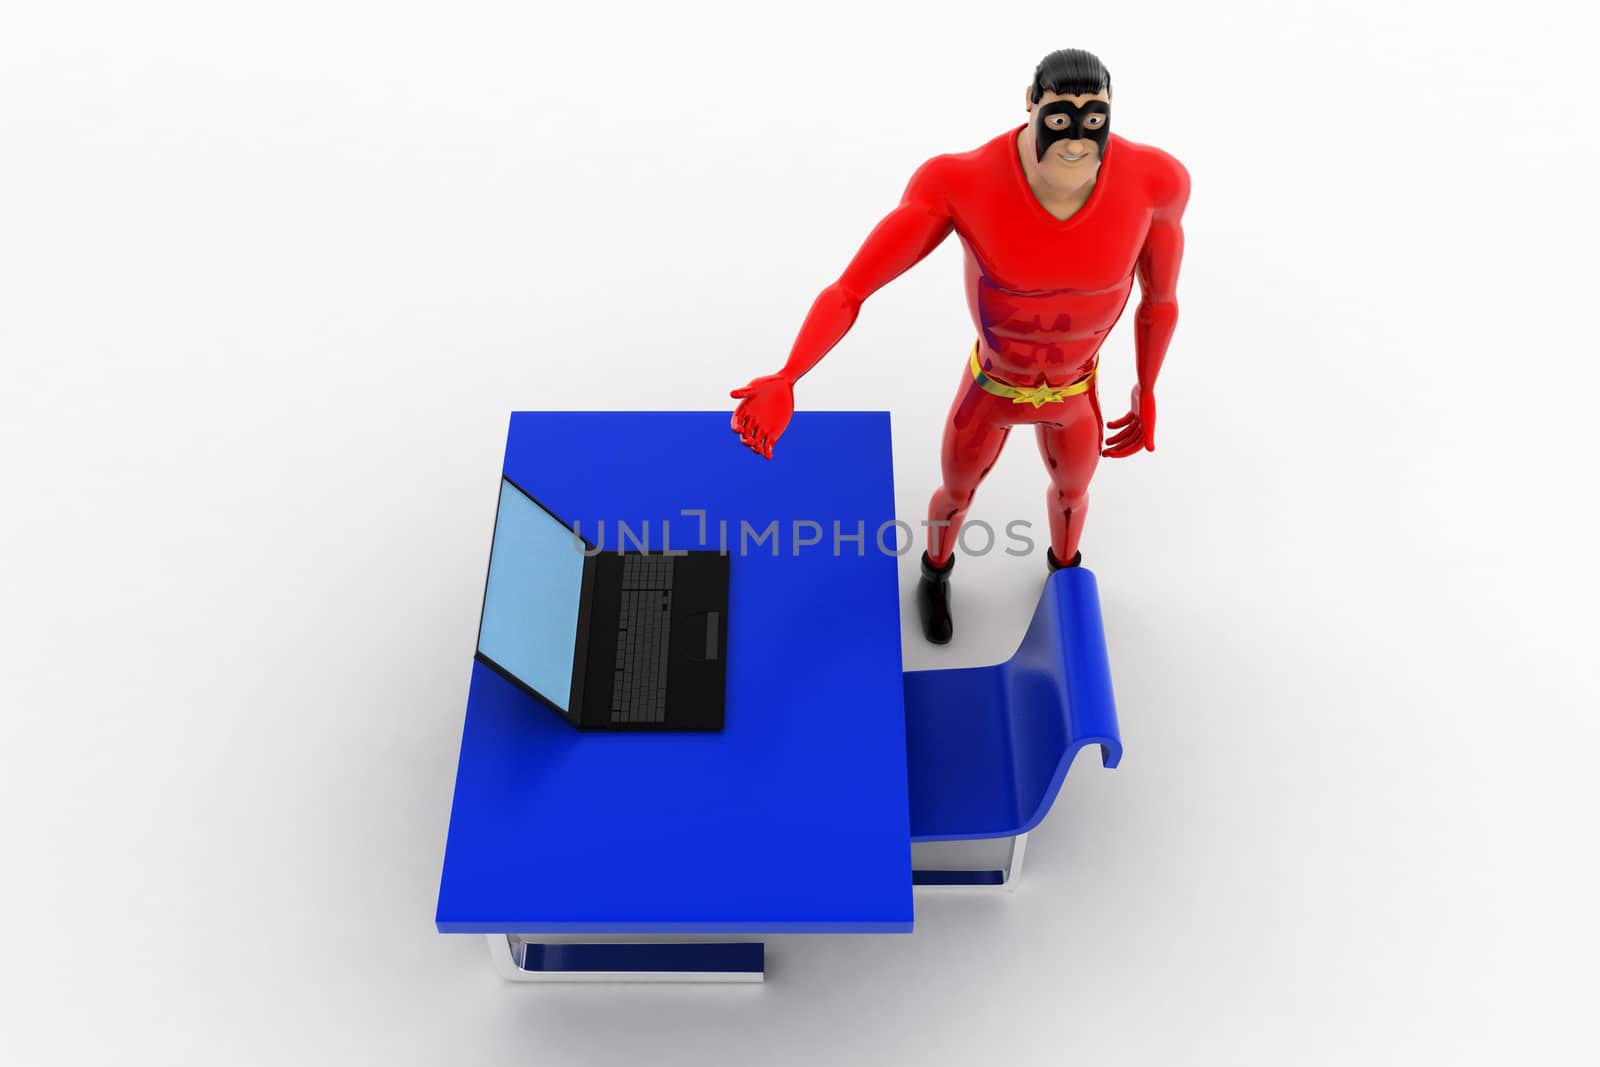 3d superhero working on laptop on office table concept by touchmenithin@gmail.com